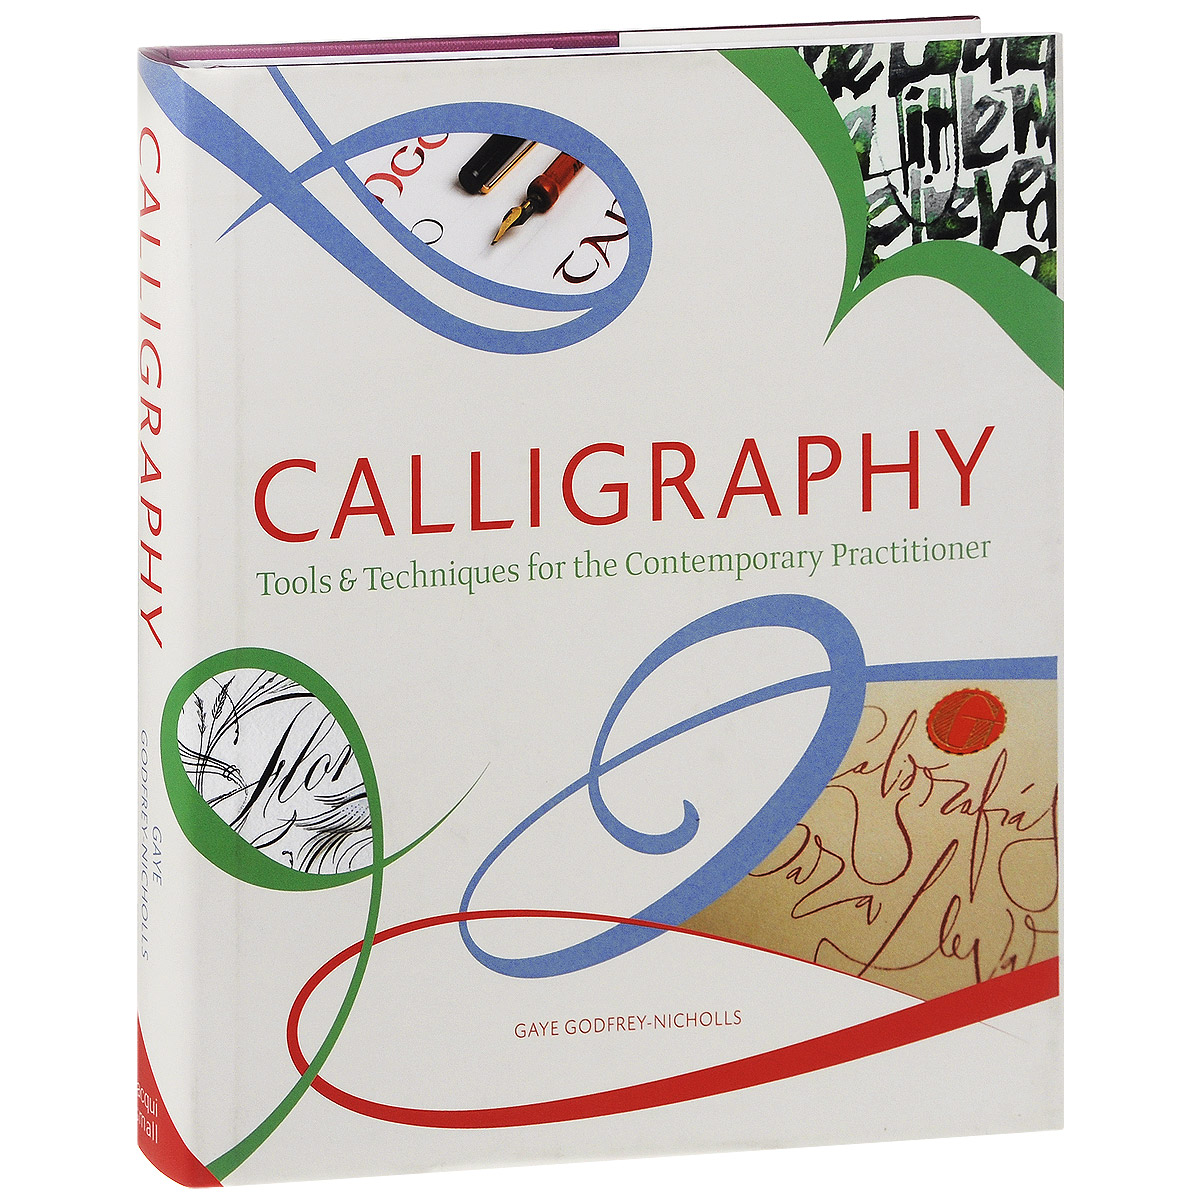 Calligraphy: Tools and Techniques for the Contemporary Practitioner